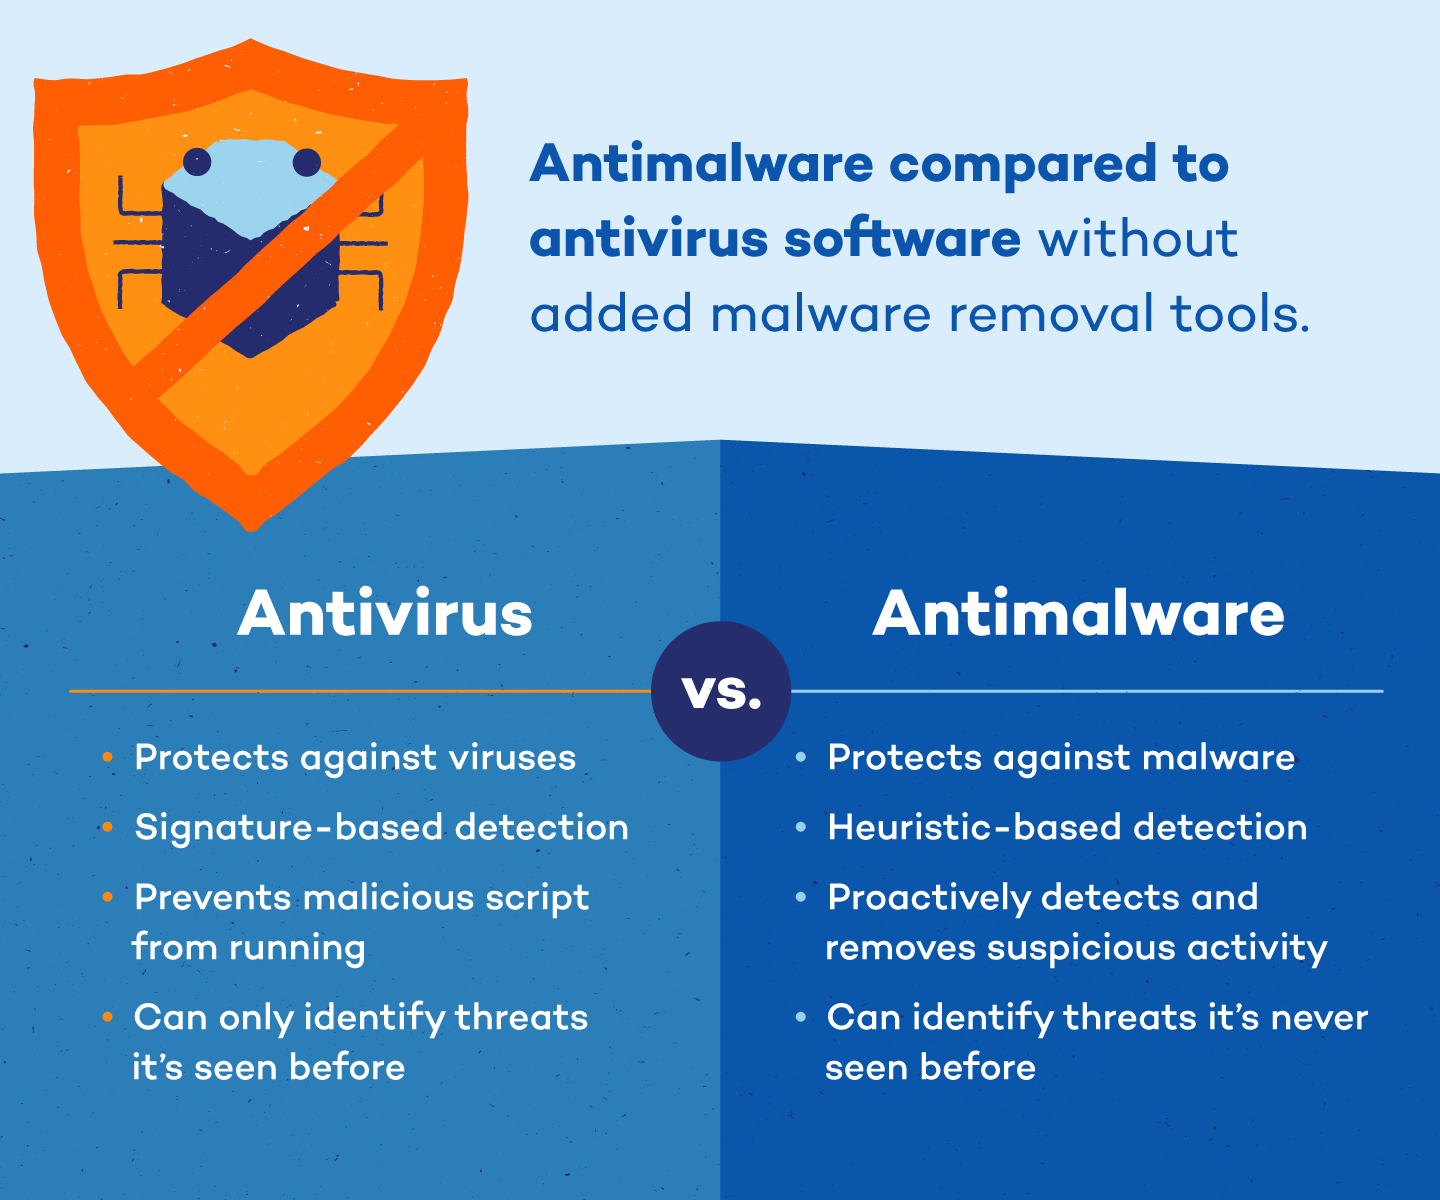 Use a reputable antivirus or anti-malware software to scan your computer for any malware or malicious programs.
If any malware is detected, follow the software's instructions to remove it from your system.